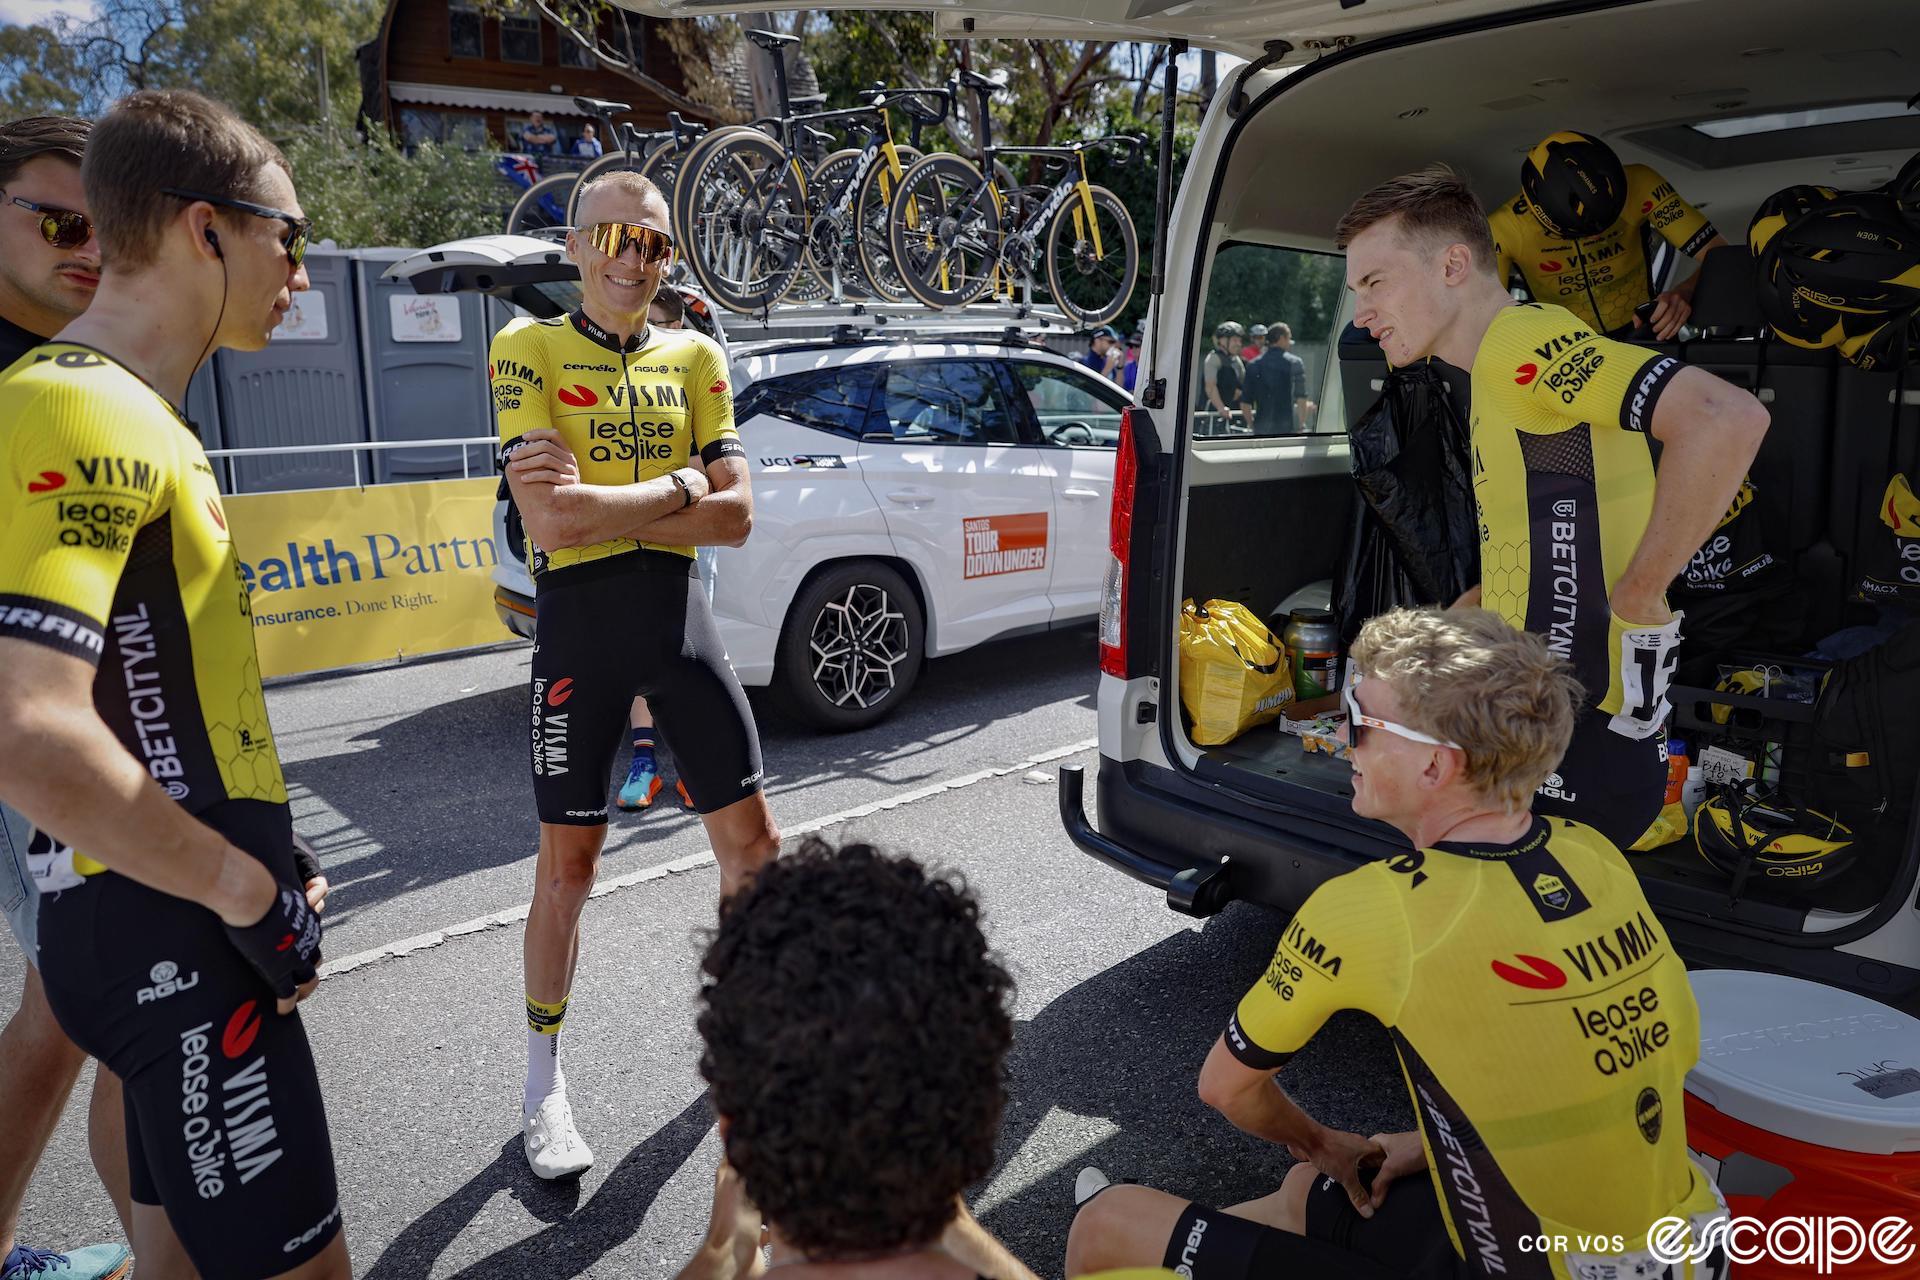 Bart Lemmen, Robert Gesink, and other Visma teammates stand at a team van for a debrief before a Tour Down Under stage. They look relaxed, and Gesink, wearing wraparound sunglasses, is smiling as he appears to hold court.